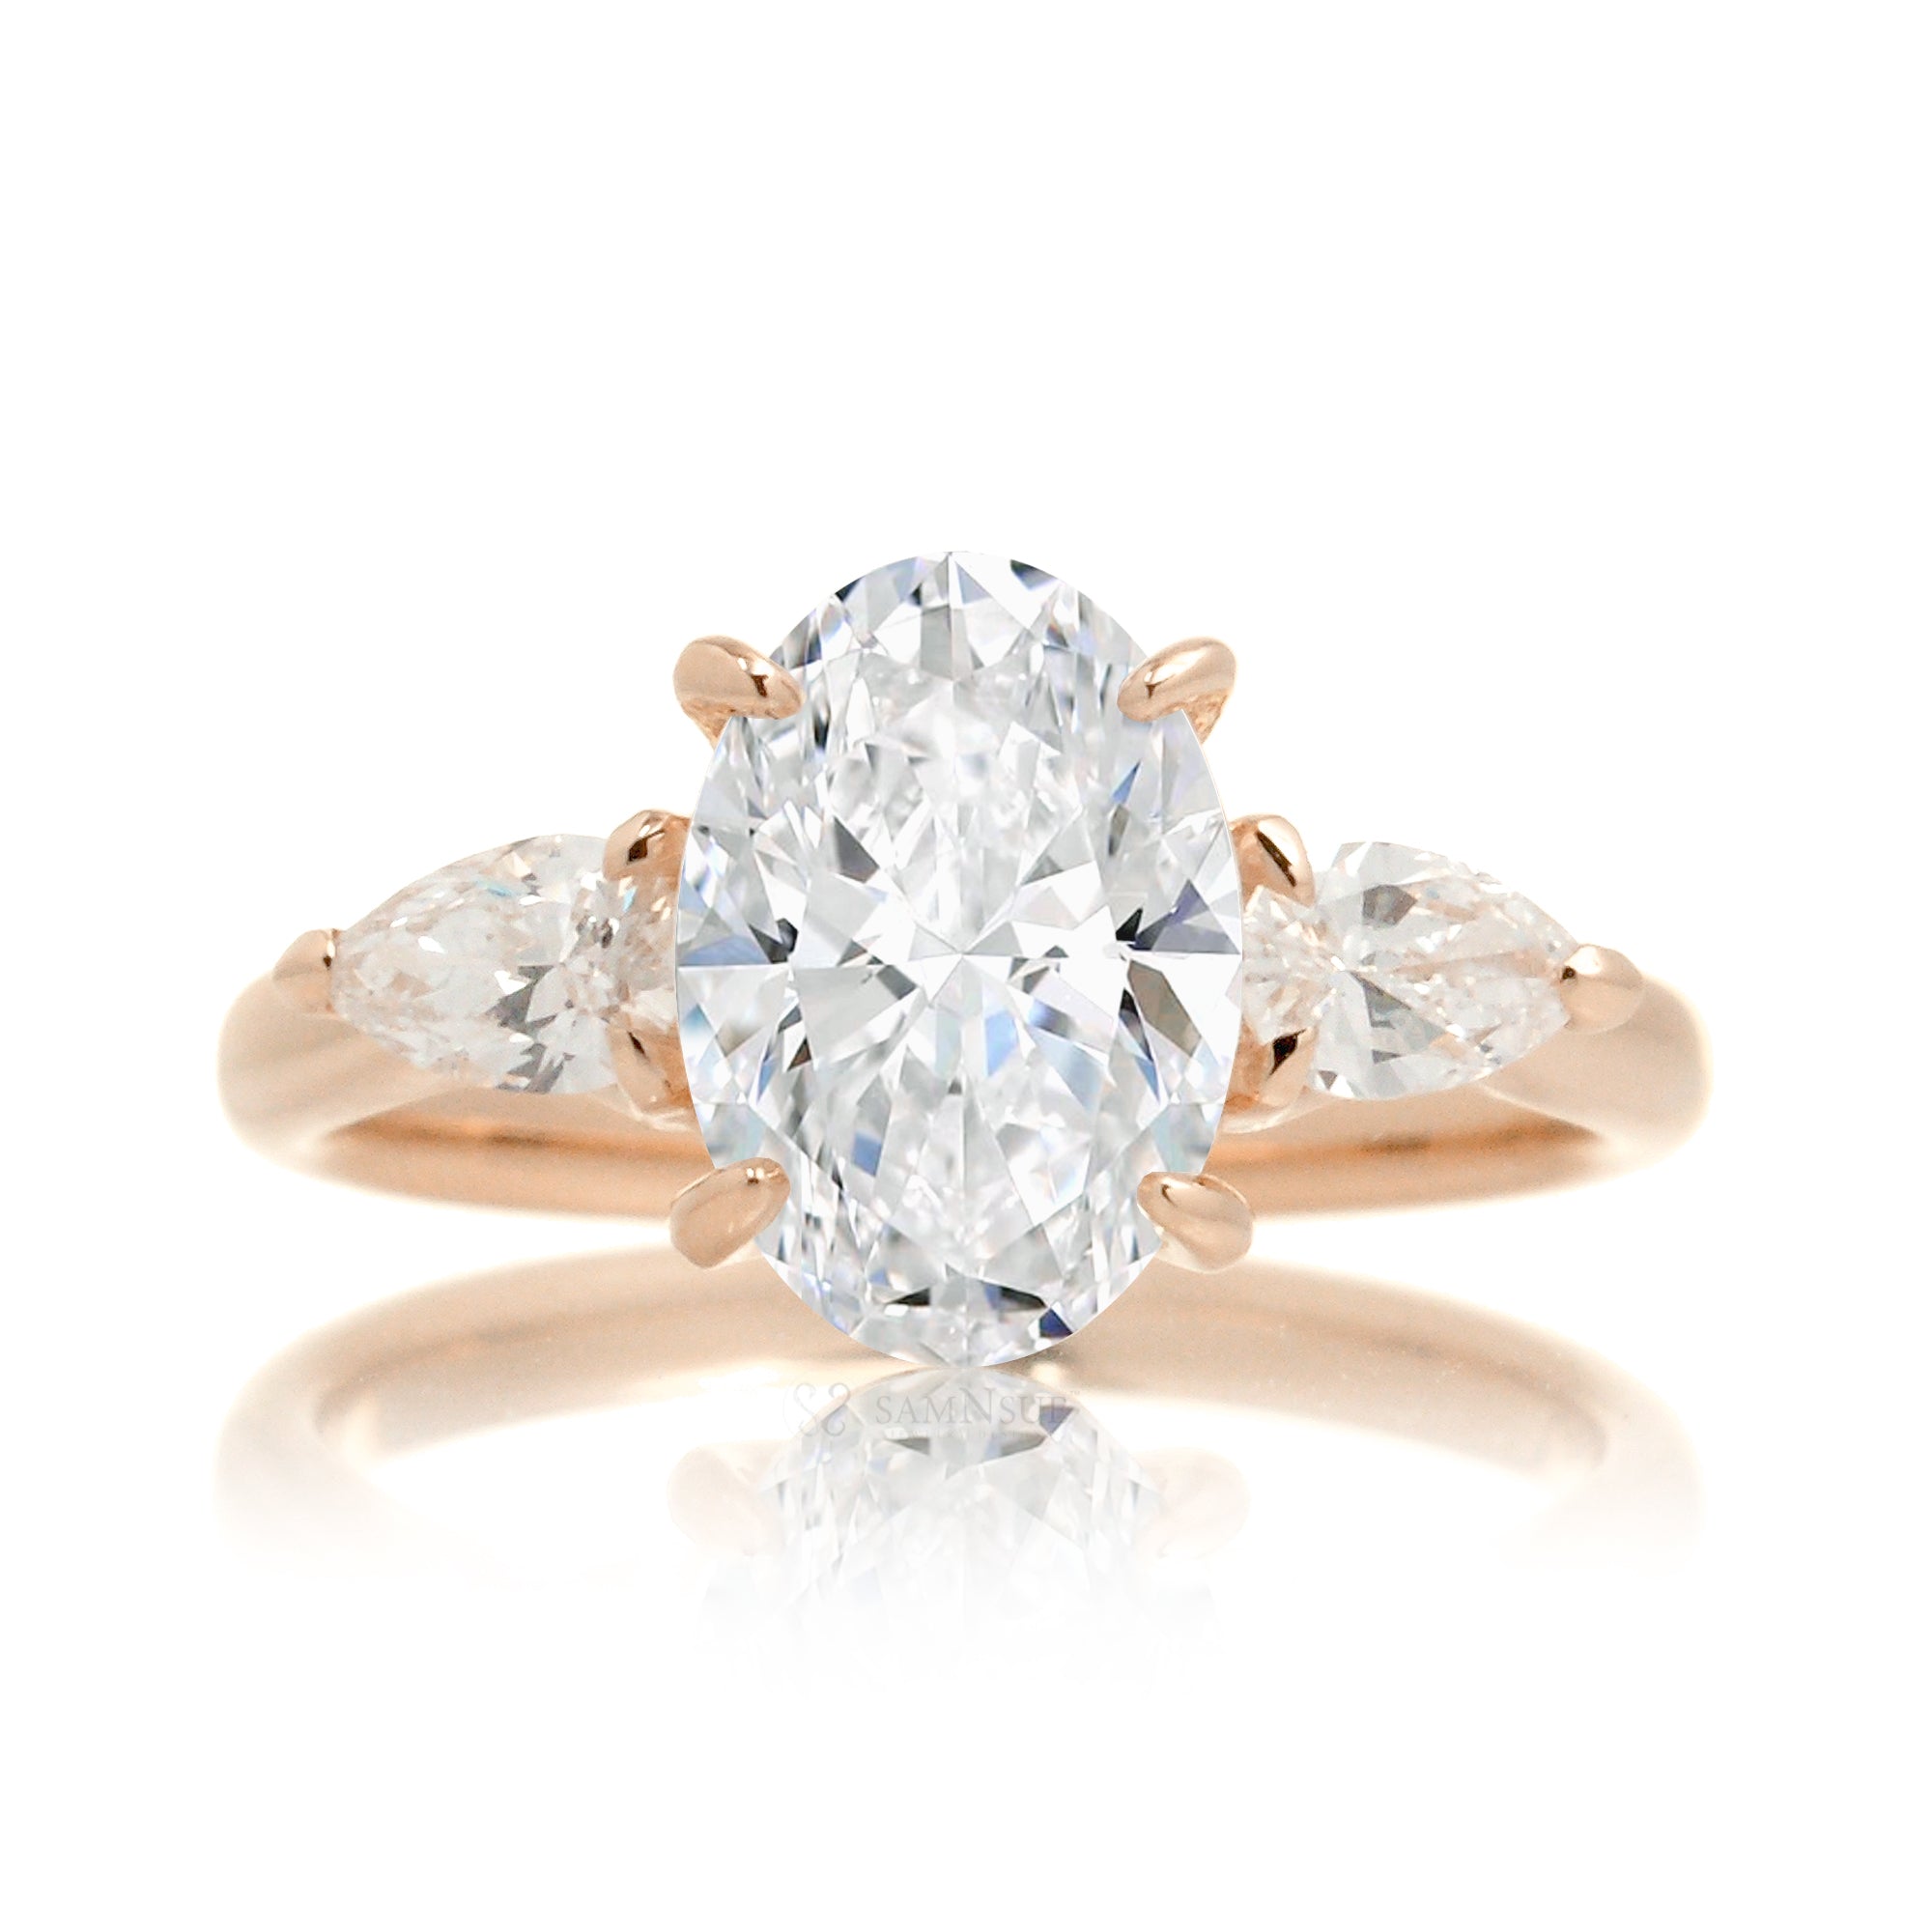 Three-stone pear and oval cut diamond engagement ring rose gold